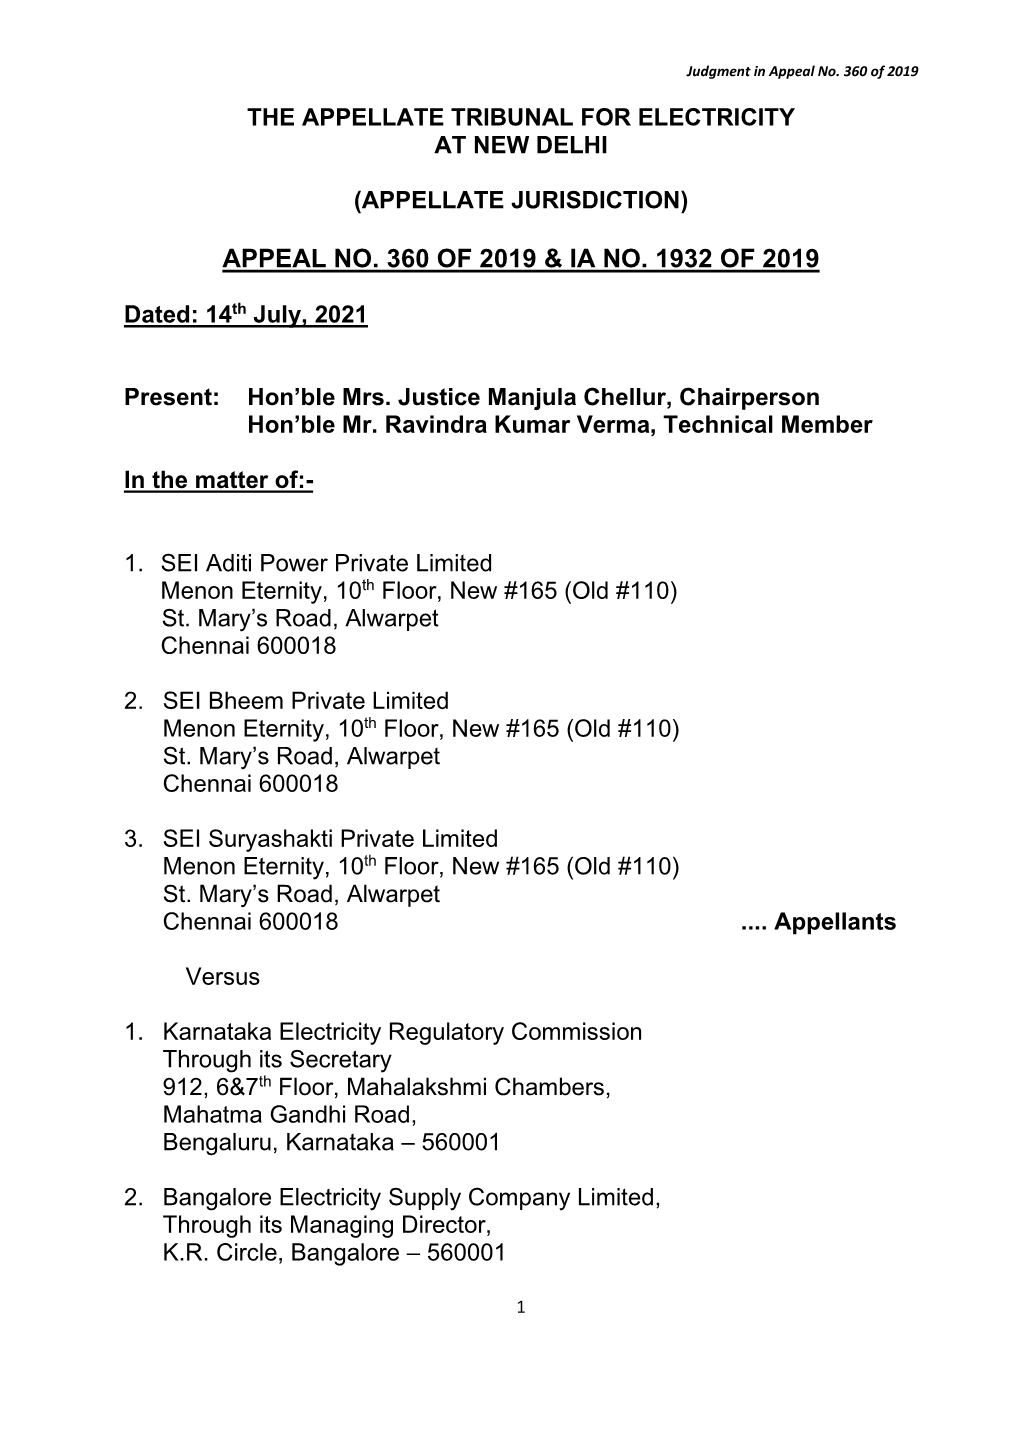 Appeal No. 360 of 2019 & Ia No. 1932 of 2019